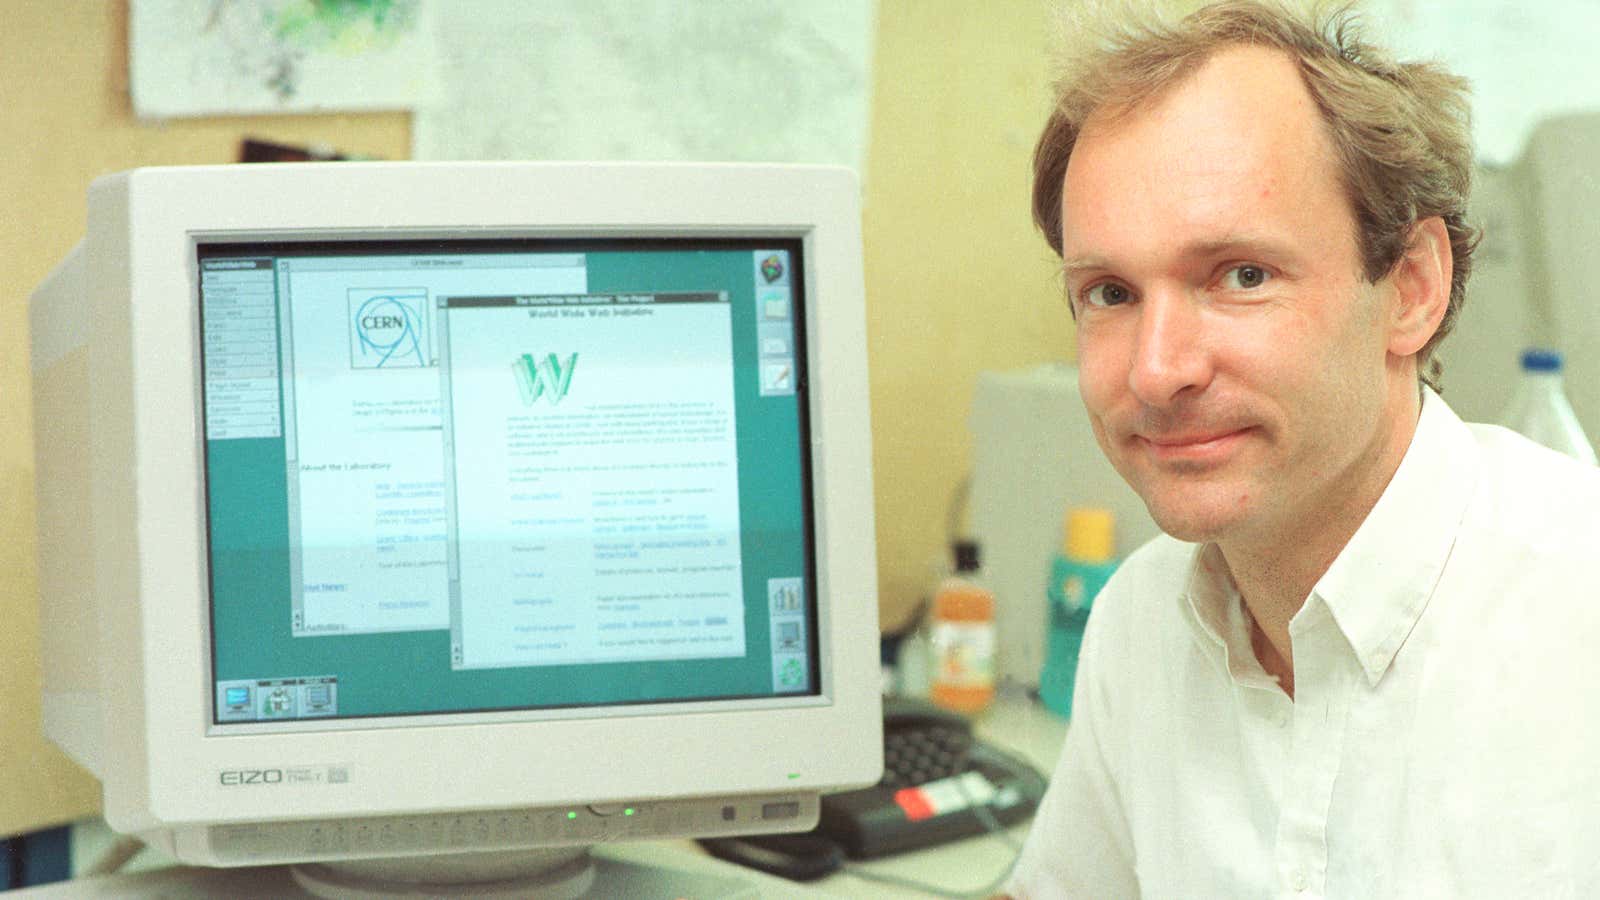 Tim Berners-Lee, the creator of the World Wide Web, in 1994.